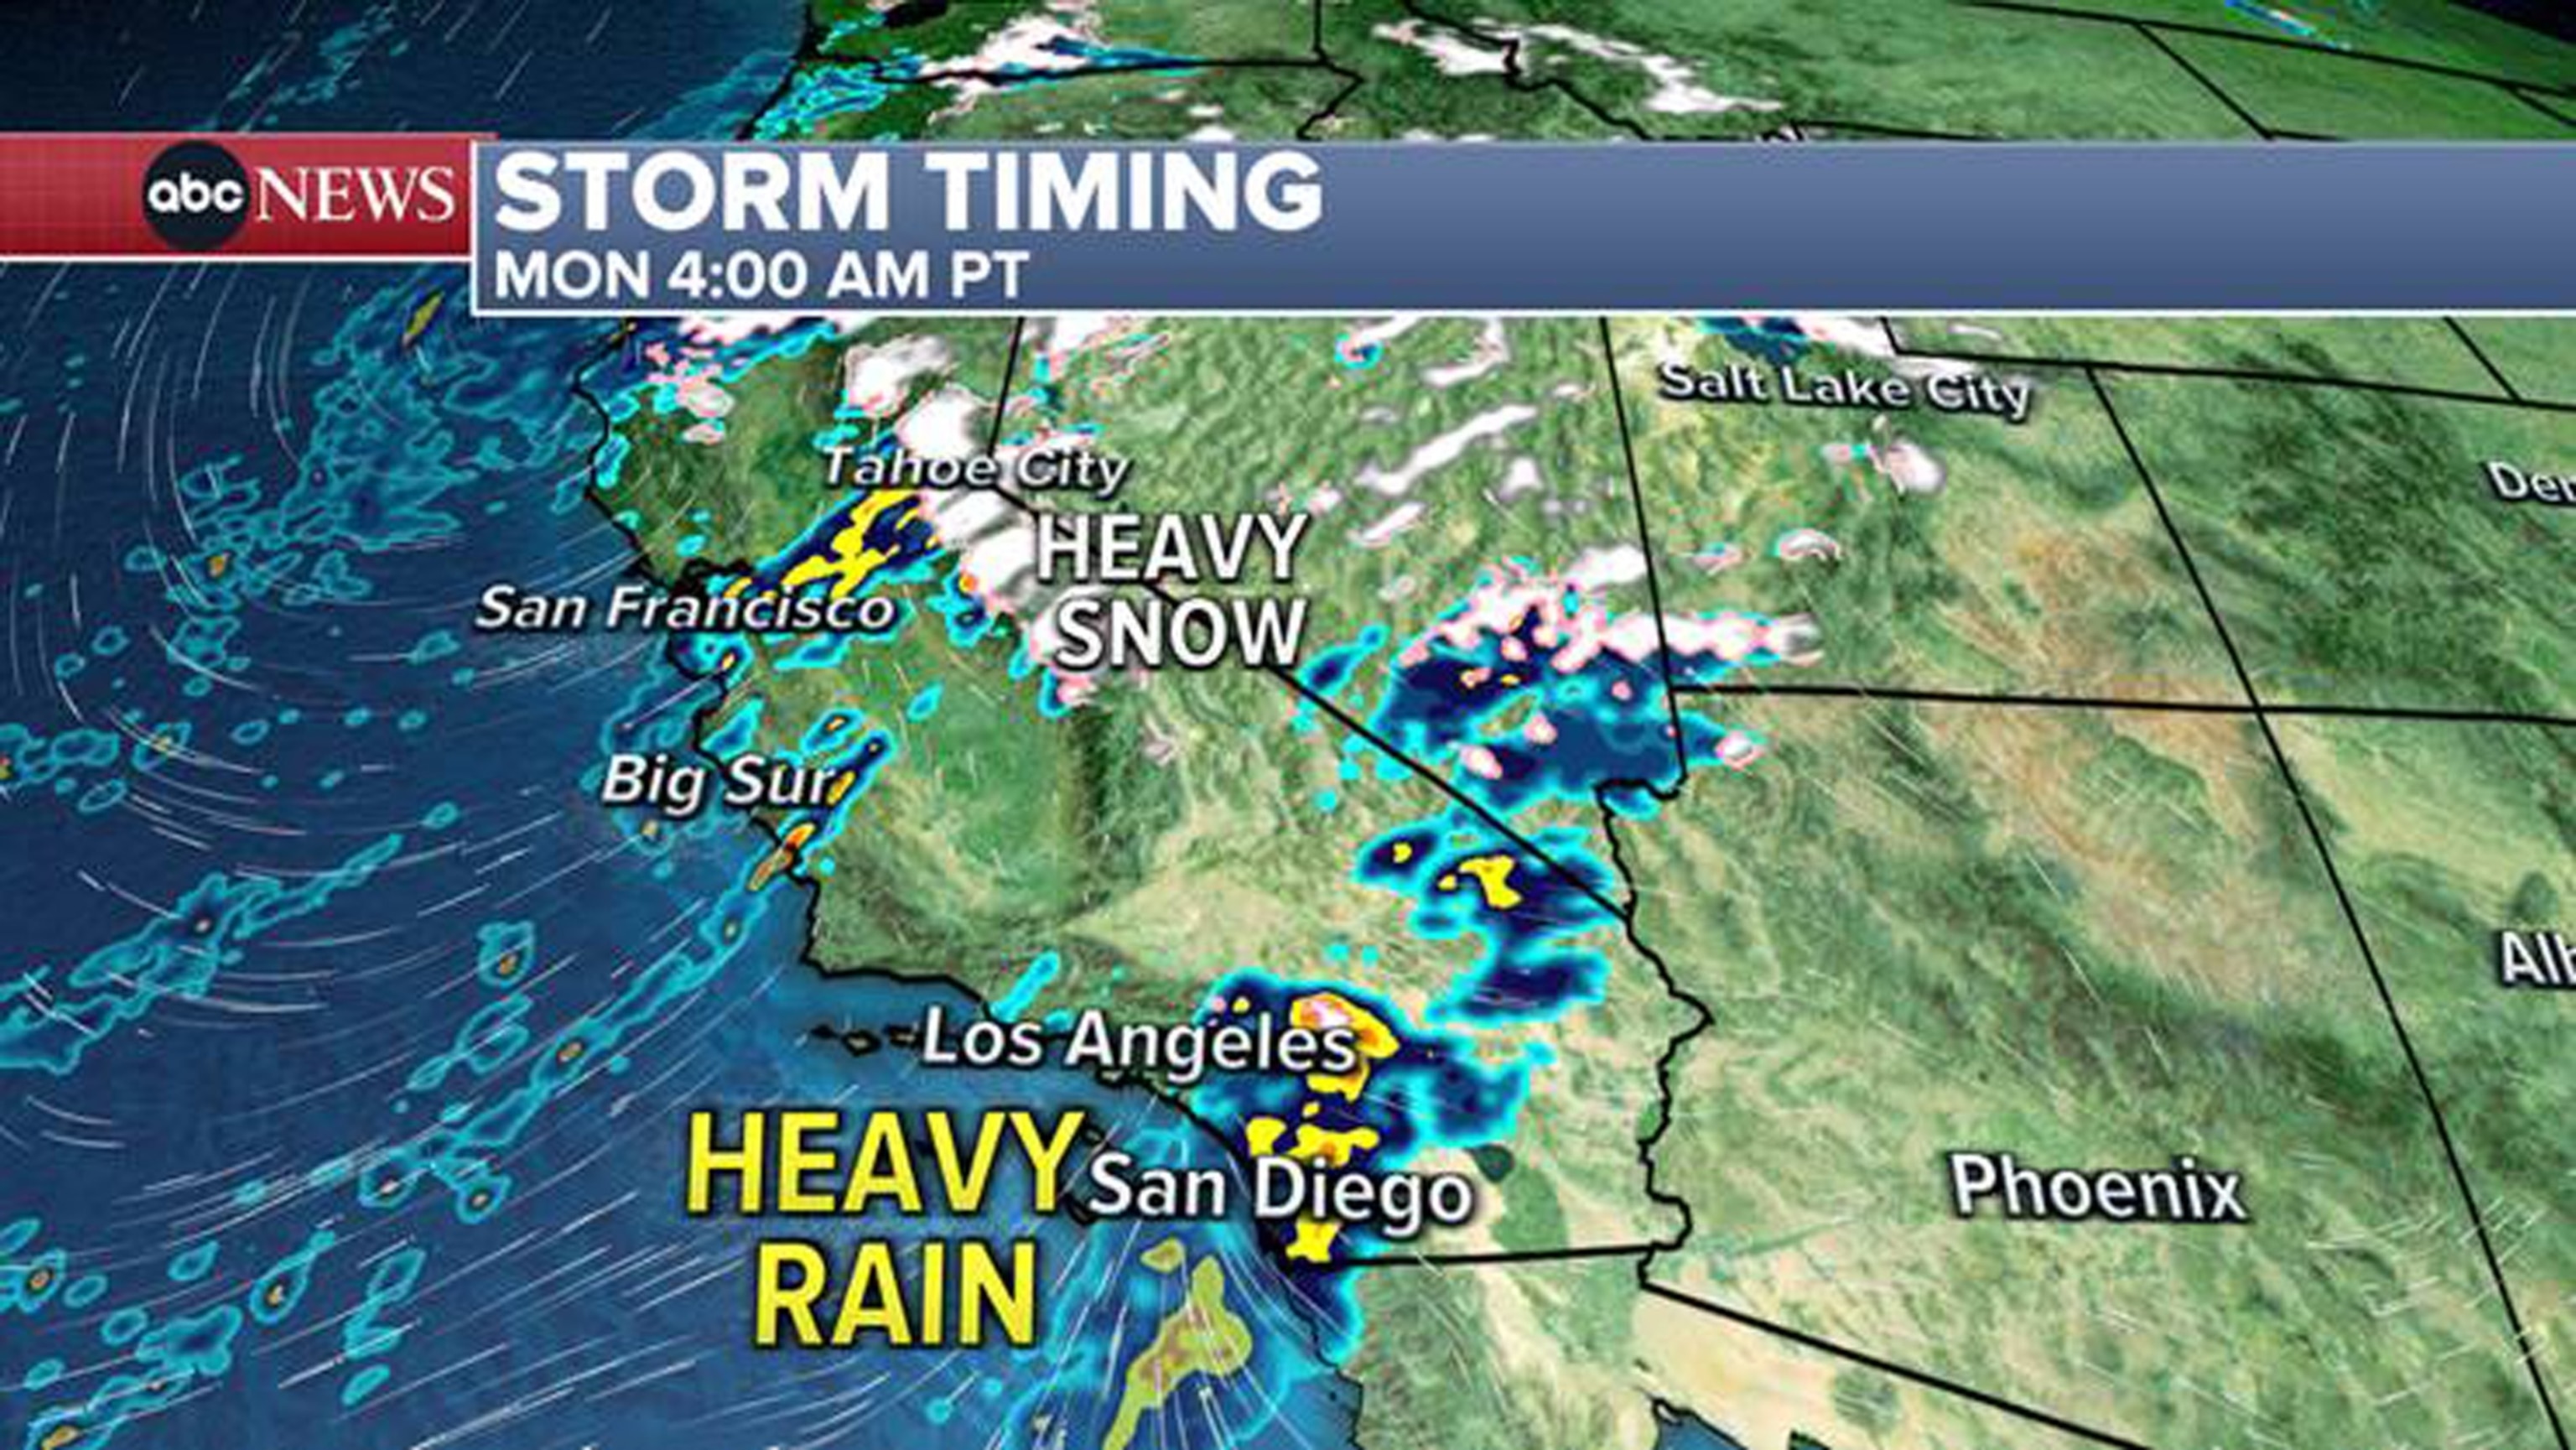 PHOTO: 4am PT (7am ET) Monday – The heaviest rain is expected in the San Diego area where their flood threat comes into play.